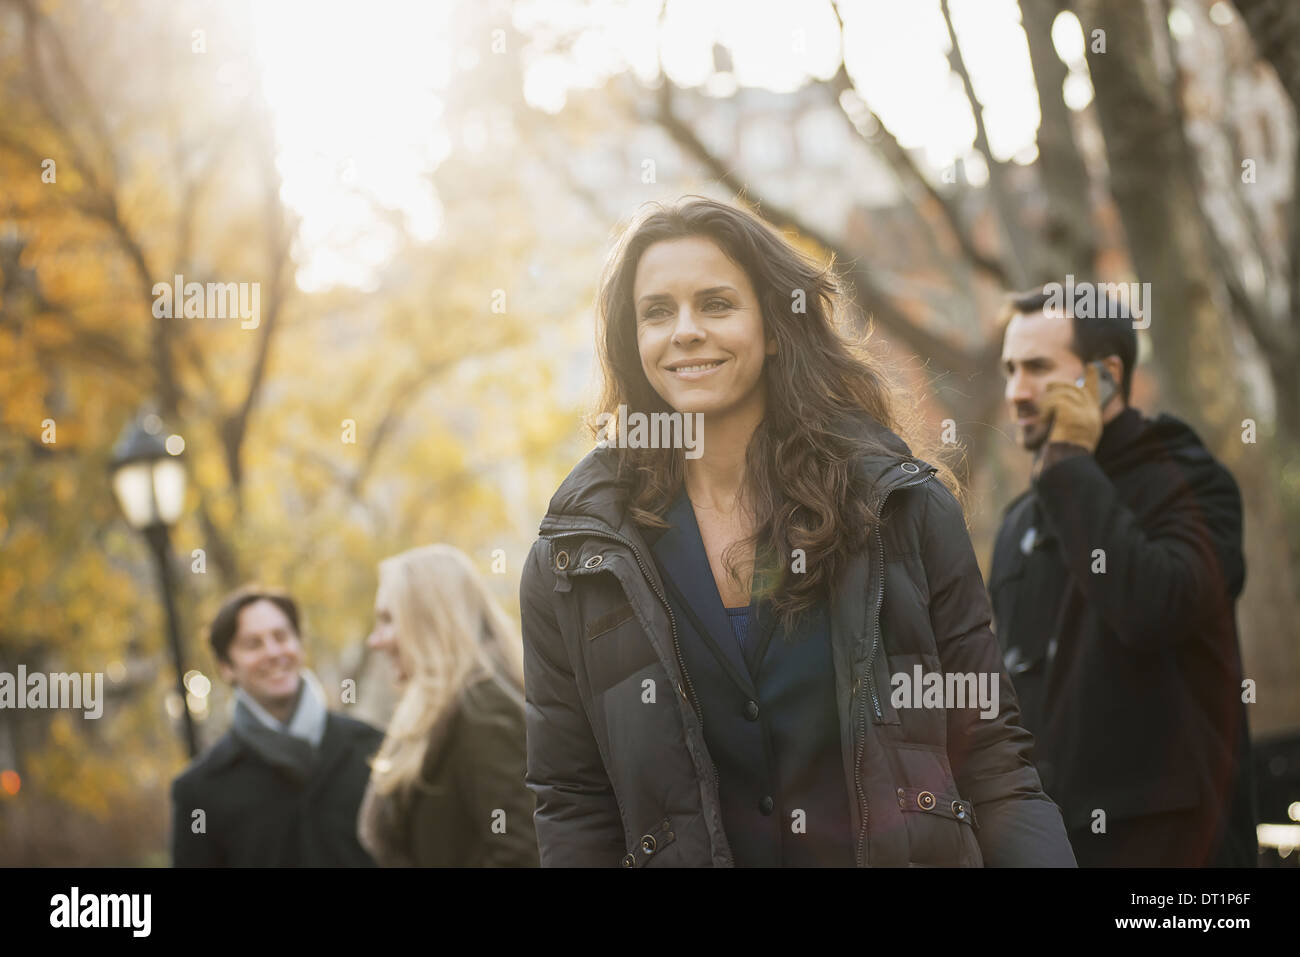 Adult group in urban park woman in front Stock Photo